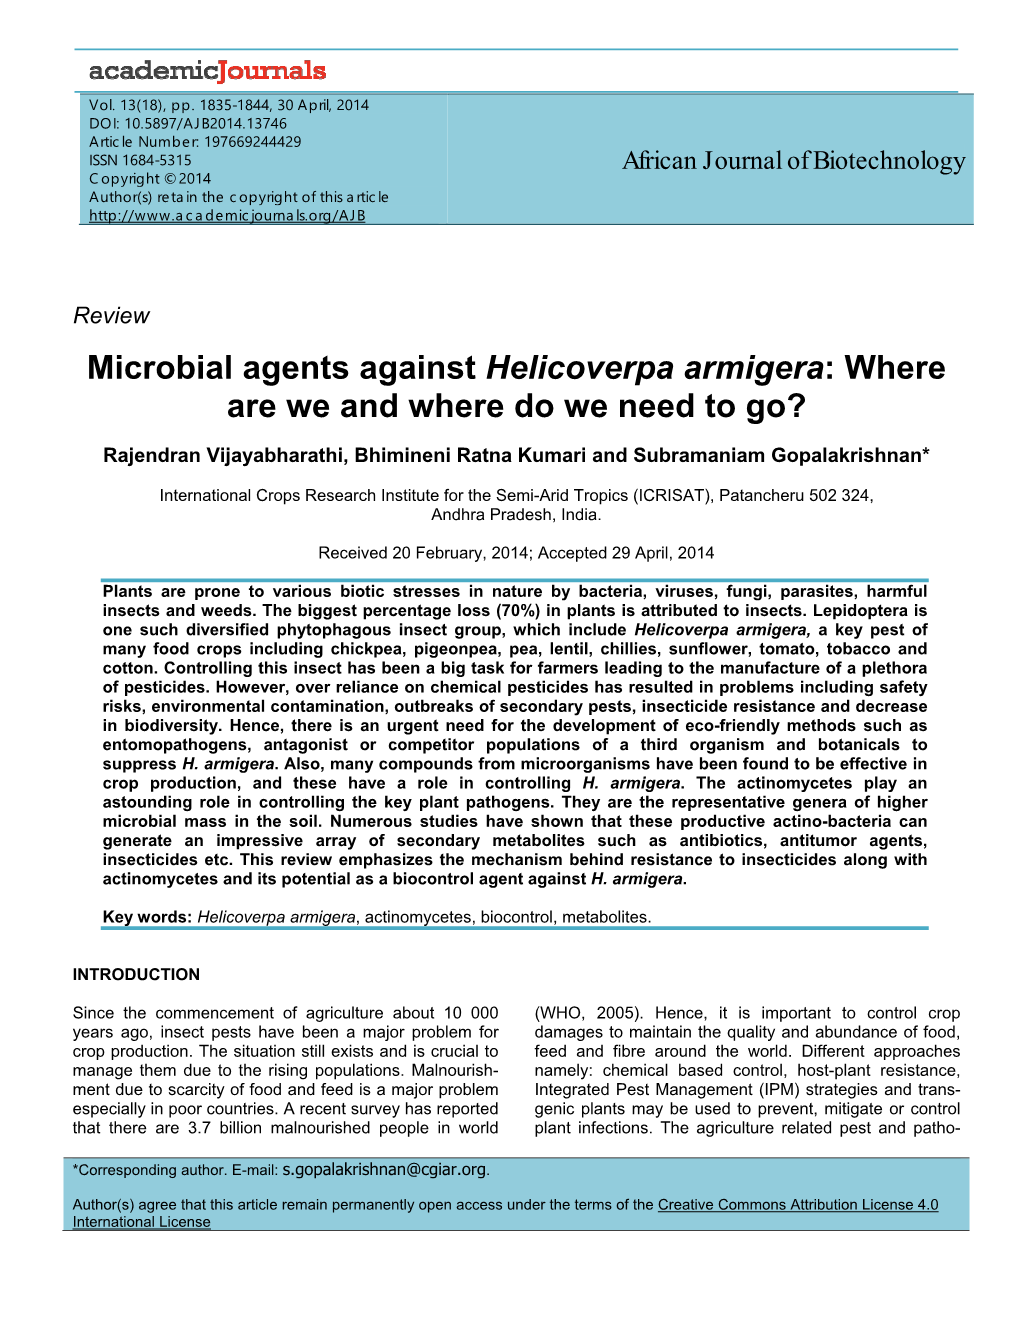 Microbial Agents Against Helicoverpa Armigera: Where Are We and Where Do We Need to Go?